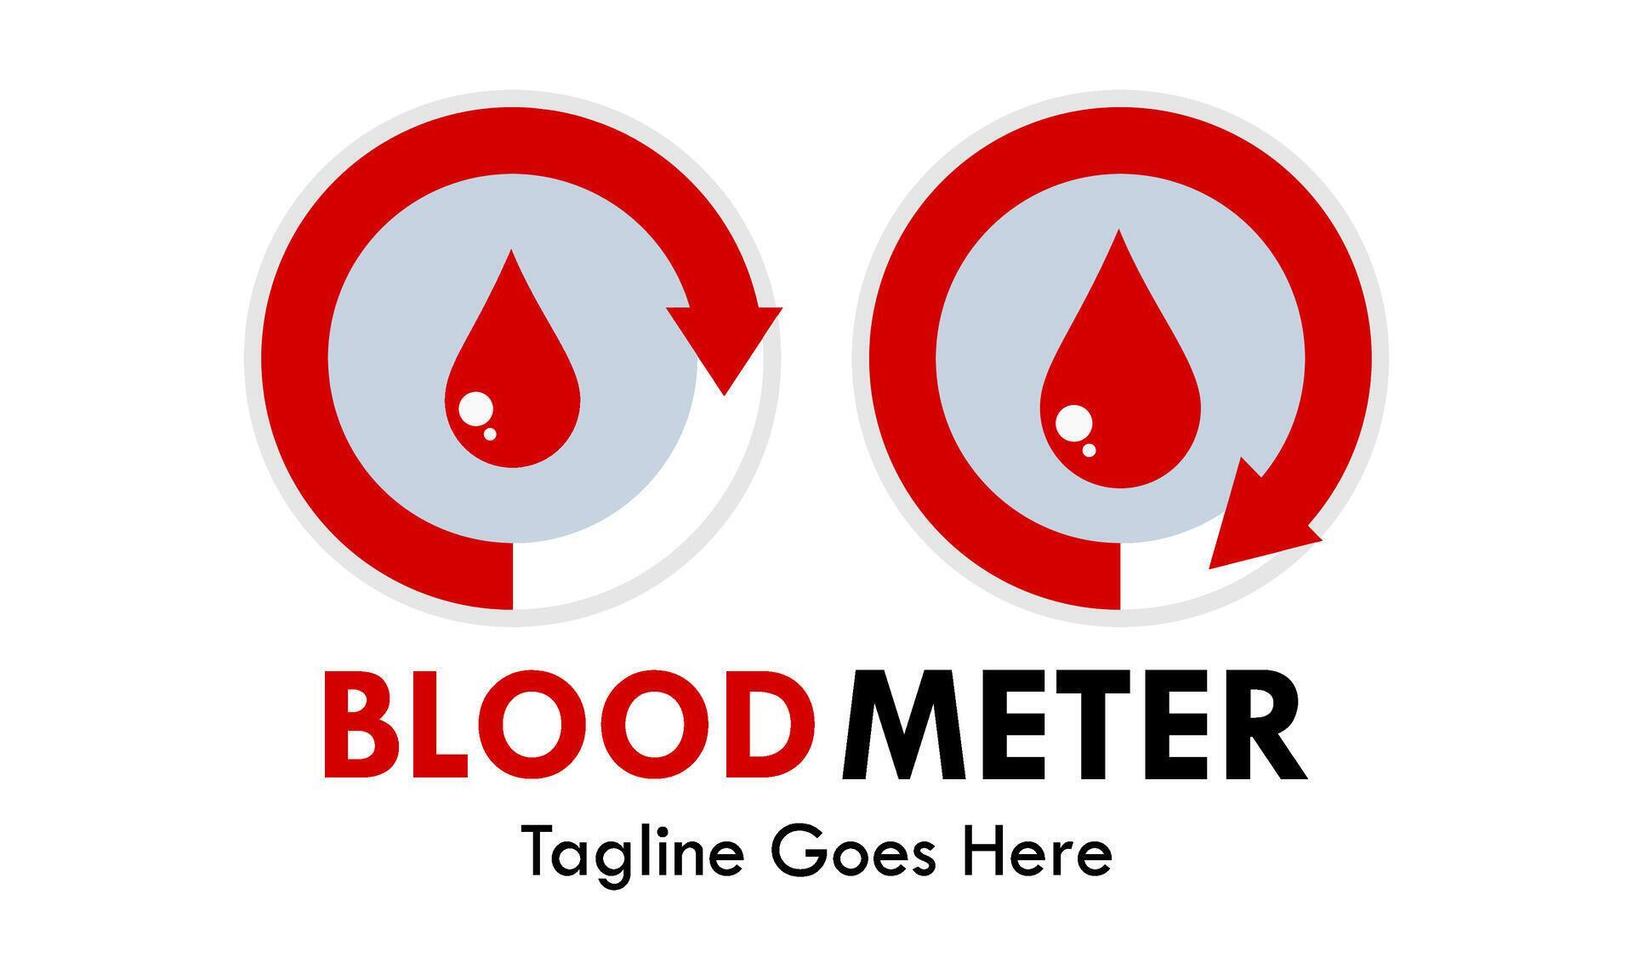 Blood meter, Loading indicator. blood gauge concept with red blood. Satisfaction indicator. vector